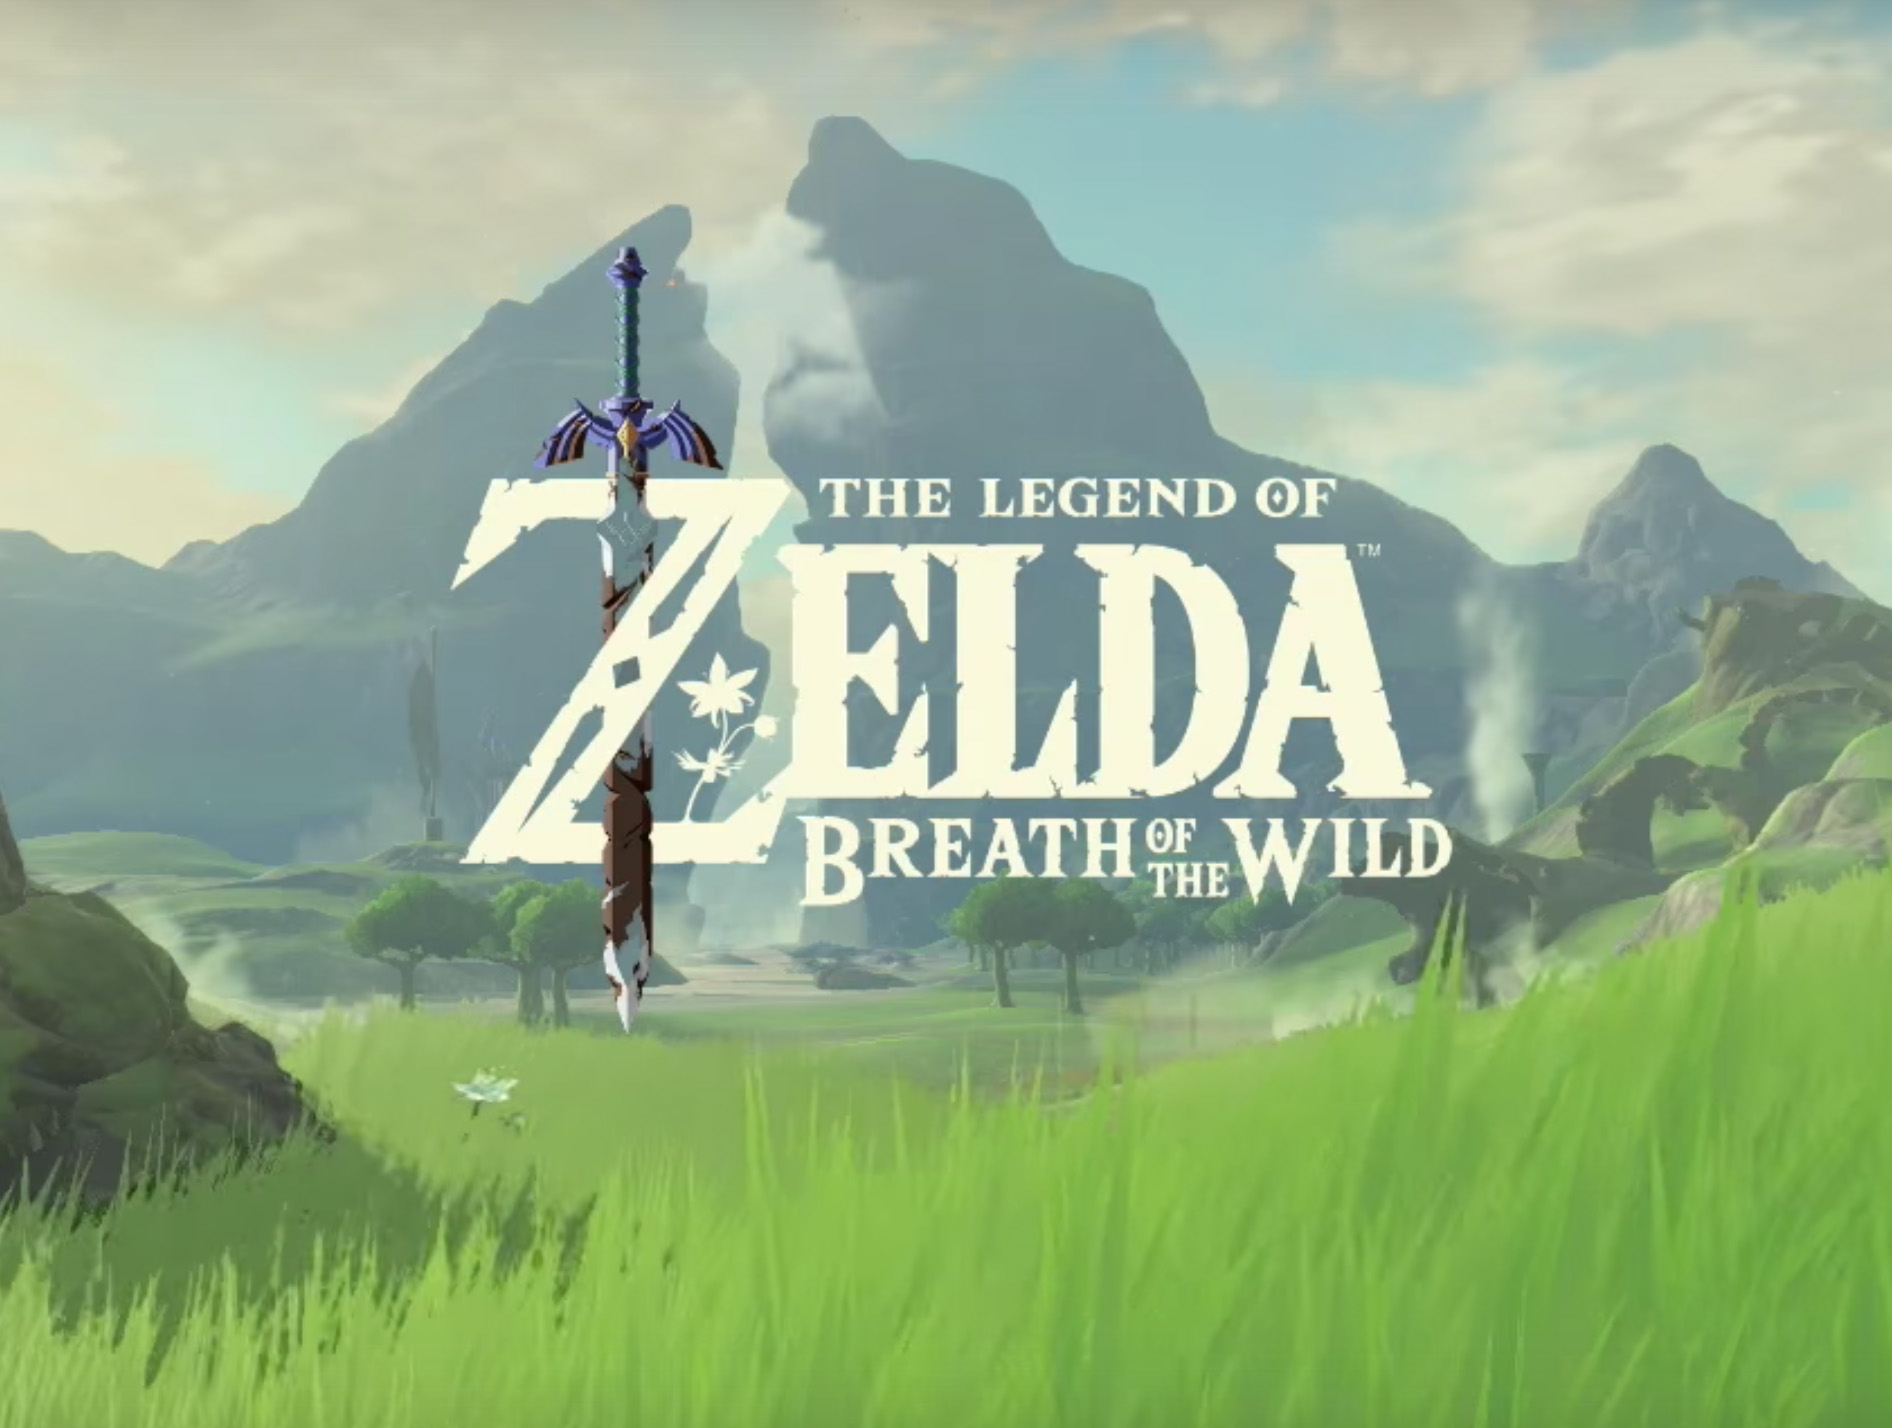 Legend of Zelda: Breath of the Wild wins Game of the Award Awards